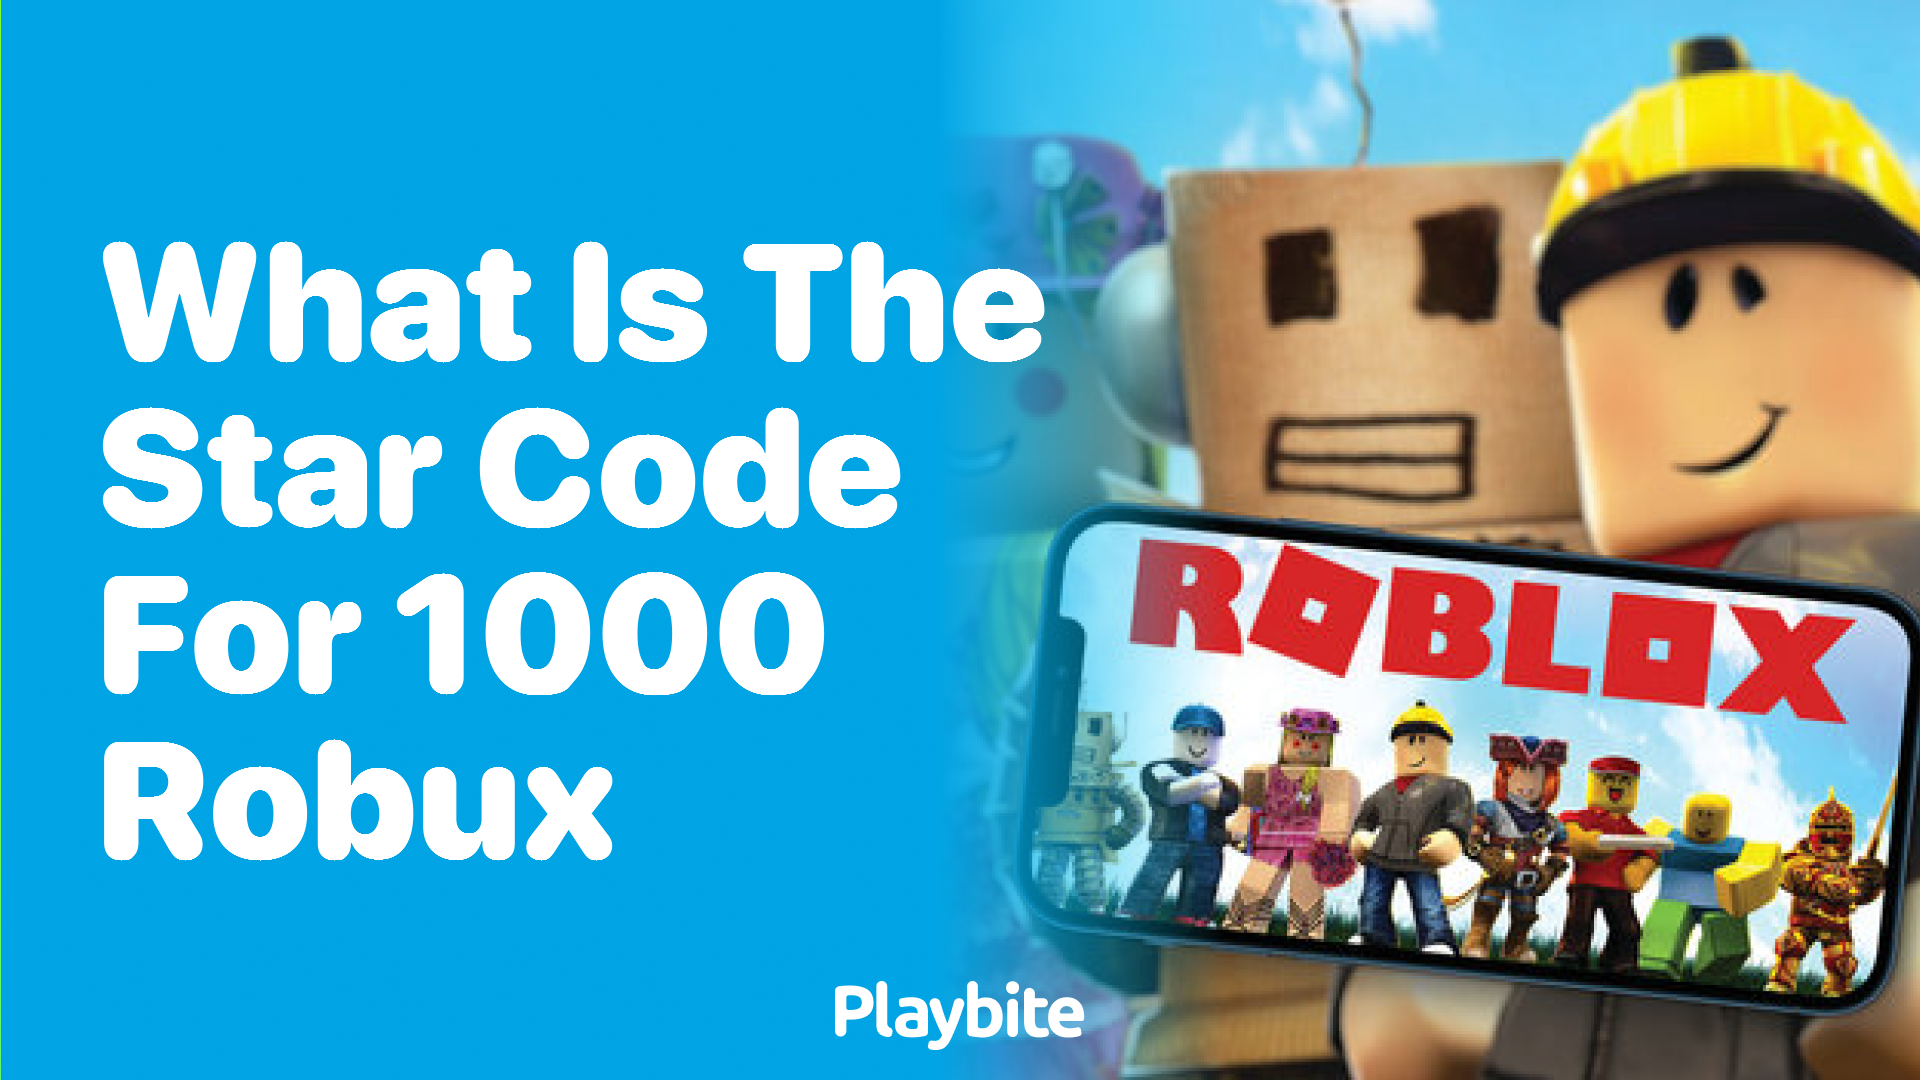 What is the Star Code for 1000 Robux?